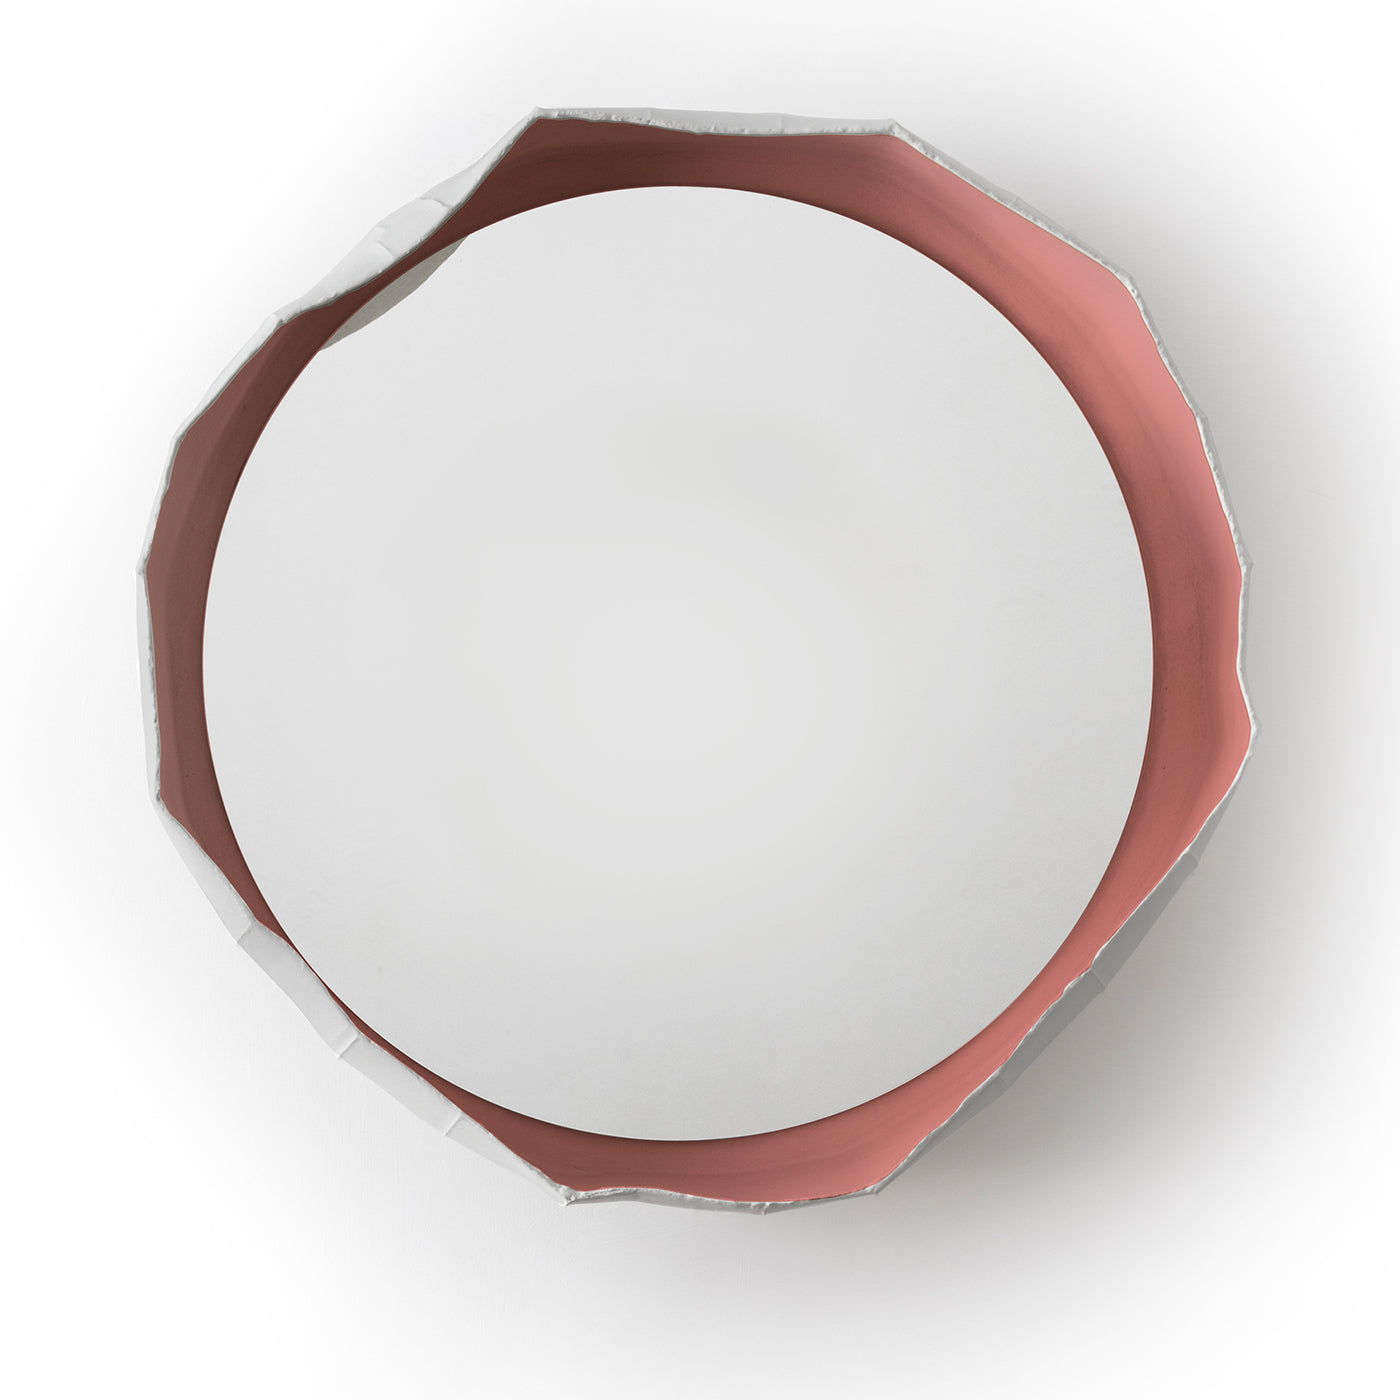 Pink and White Ninfea 50 Mirror By G. Botticelli & P. Paronetto - Alternative view 1